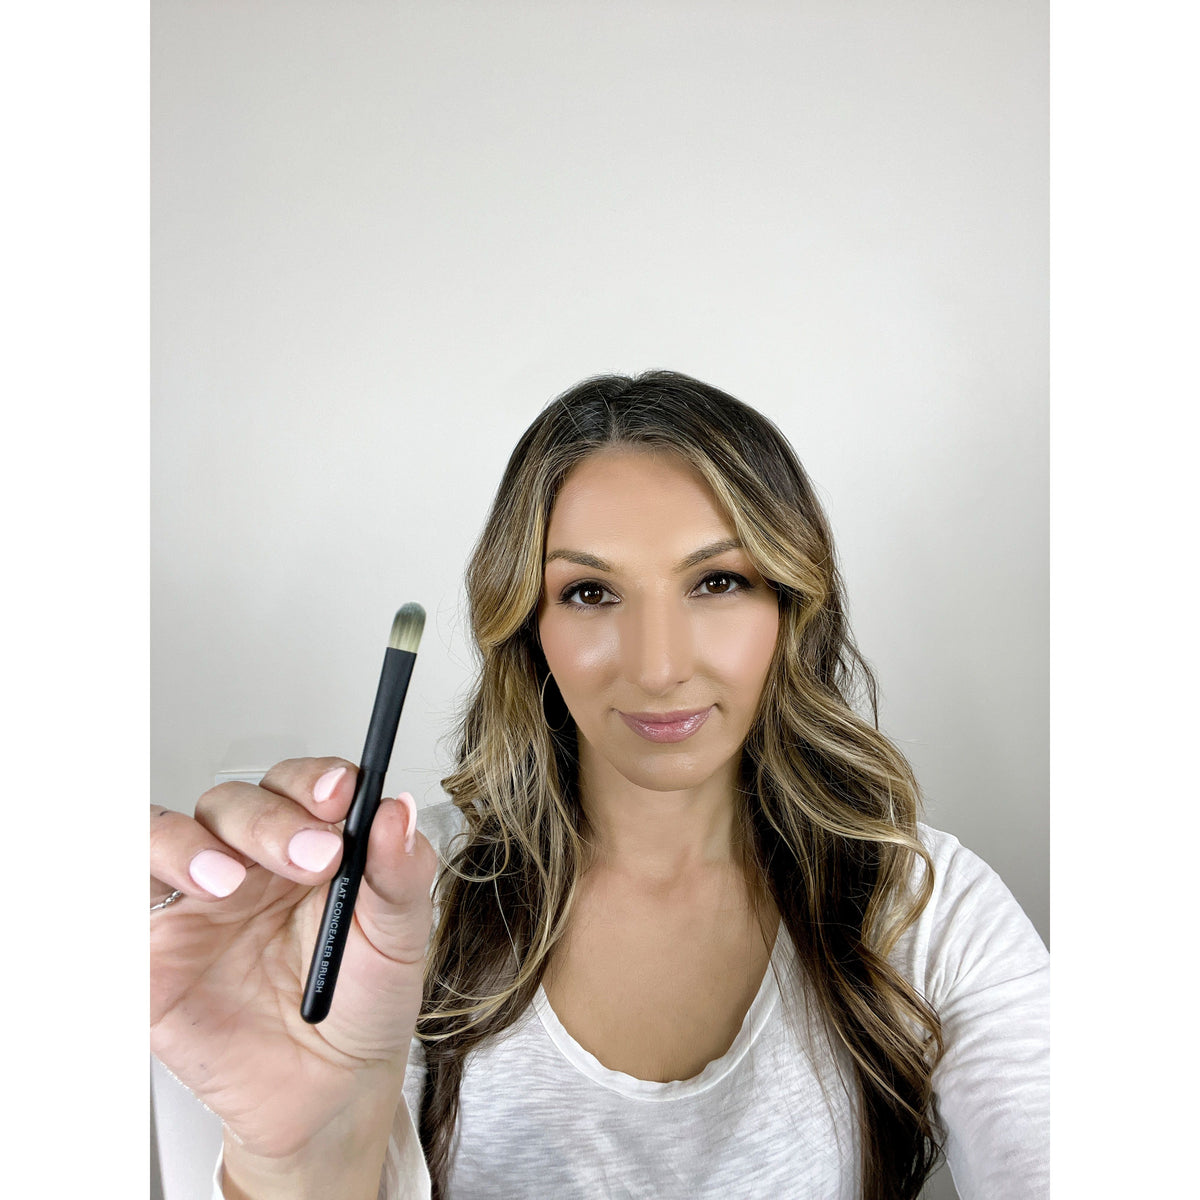 The Concealer Brush, by Jacqueline Kalab